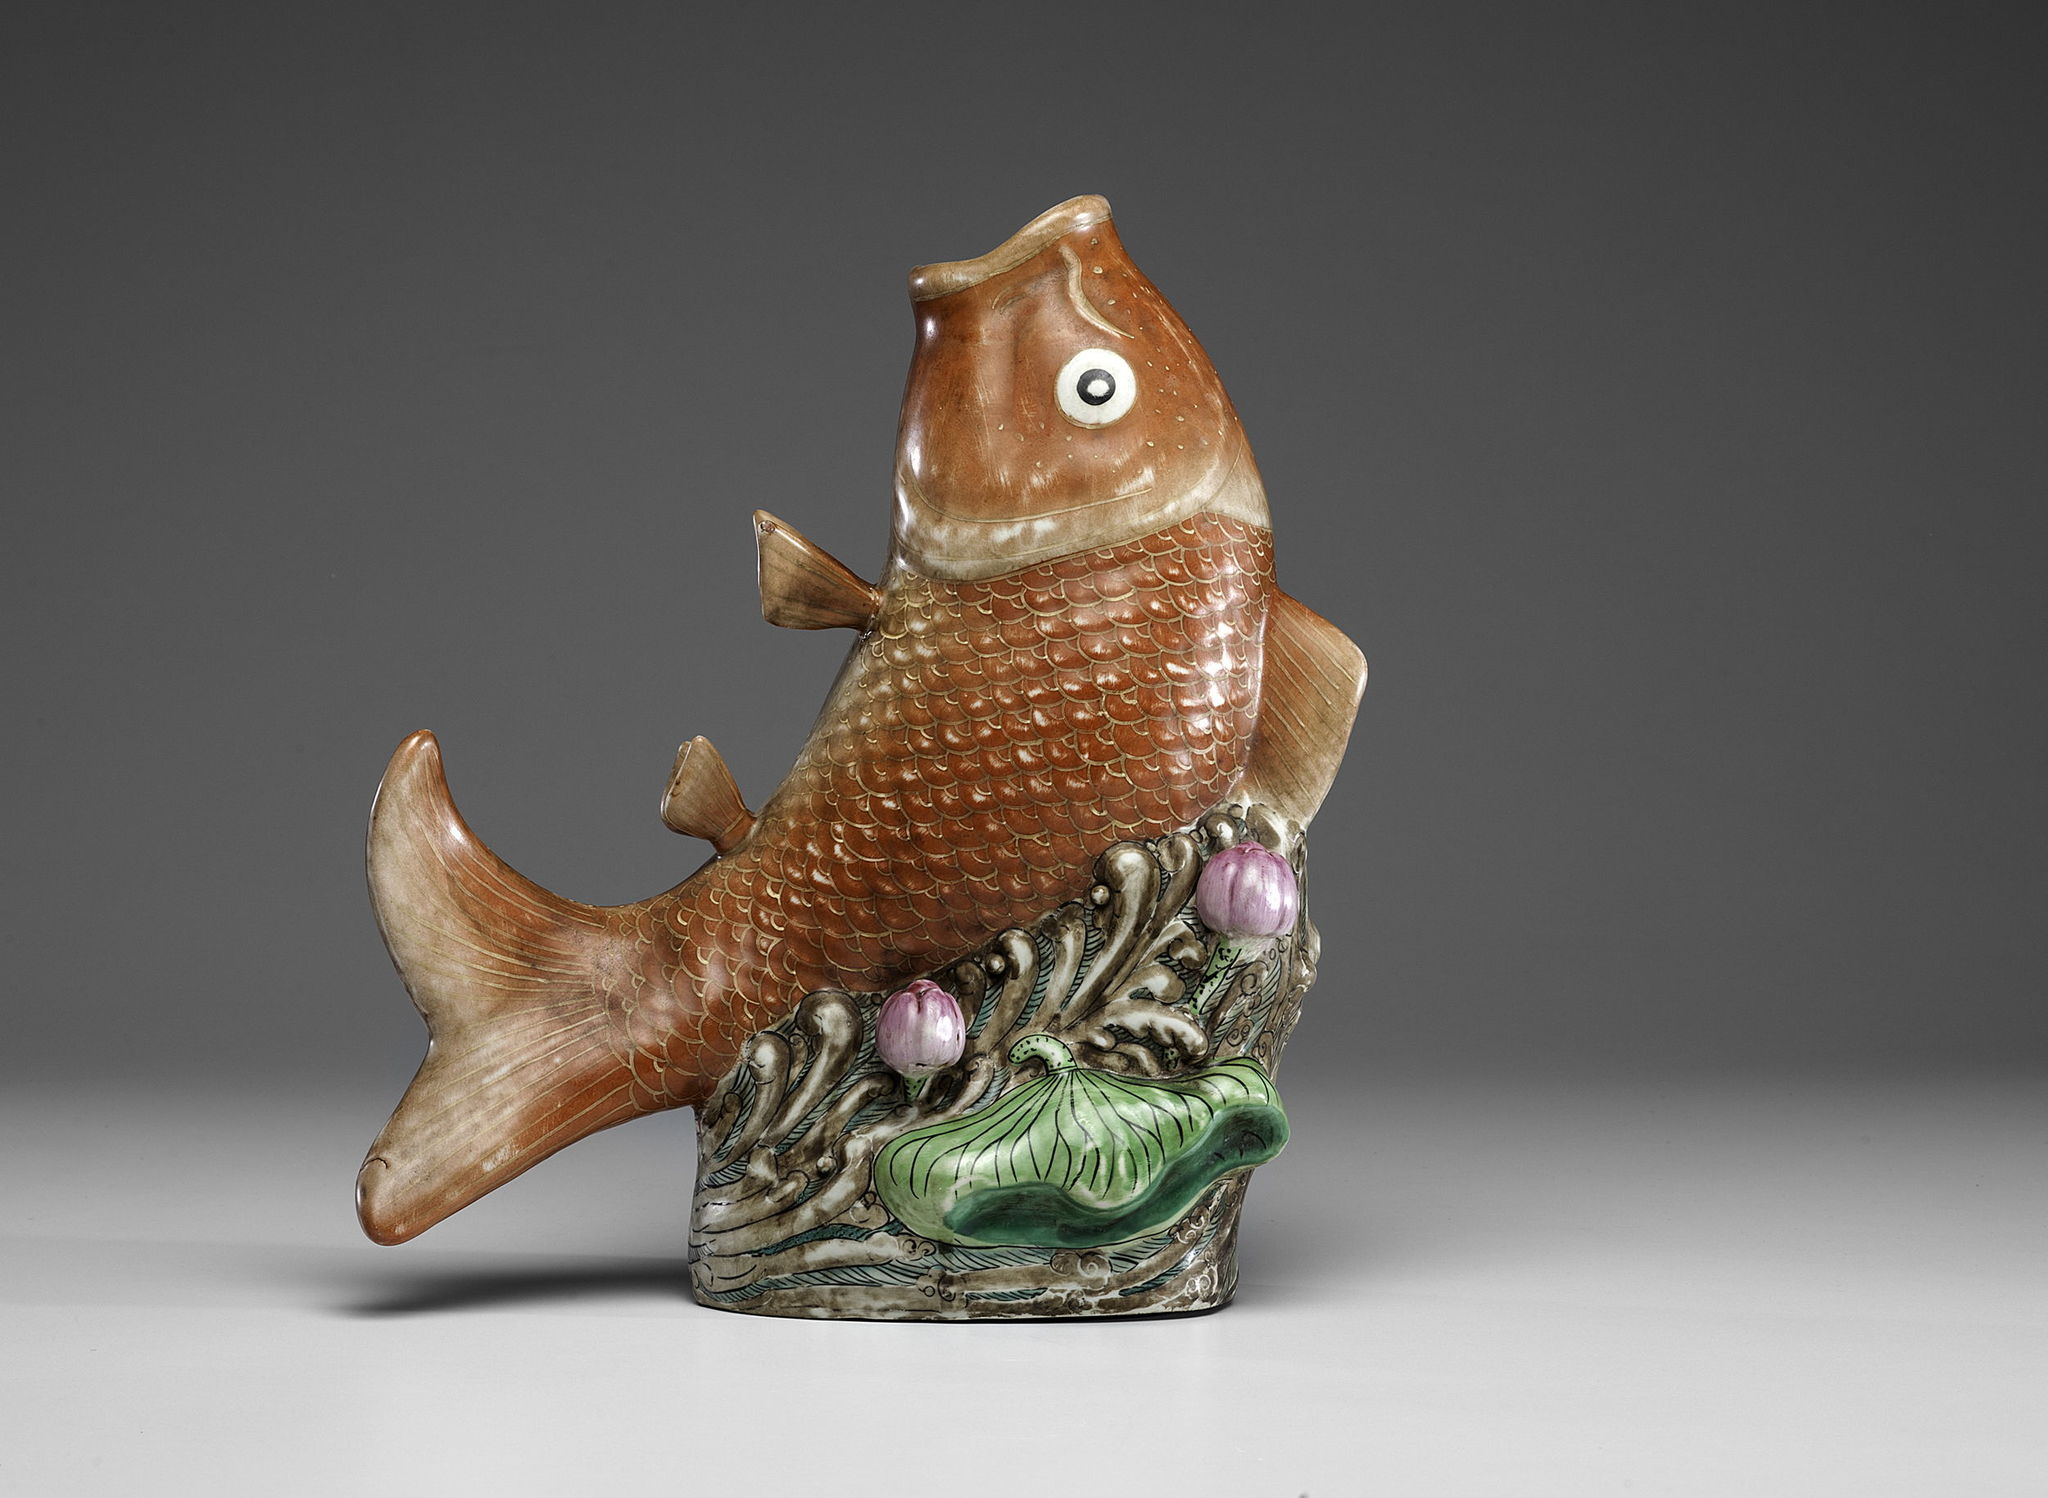 Fish vases are believed to be carriers of many good traits and bring luck to the household. This koi vase sold for $861.